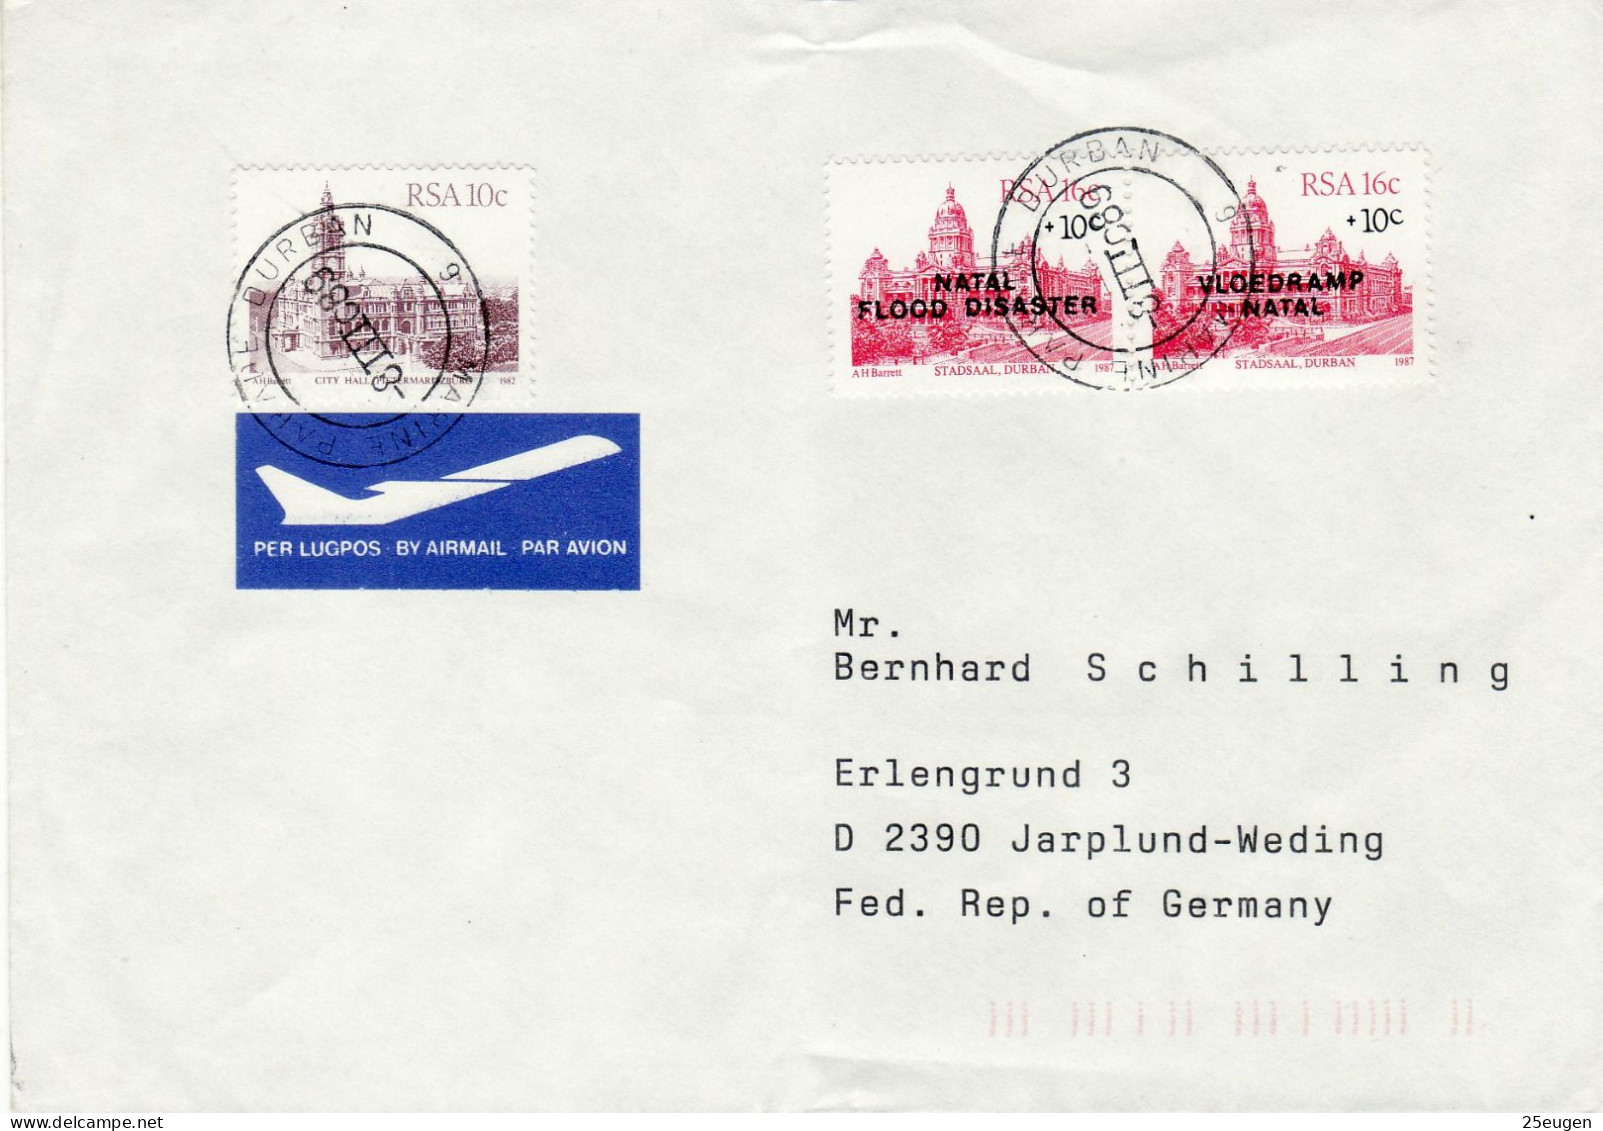 SOUTH AFRICA 1989 AIRMAIL LETTER SENT FROM DURBAN TO JARPLUND - Covers & Documents